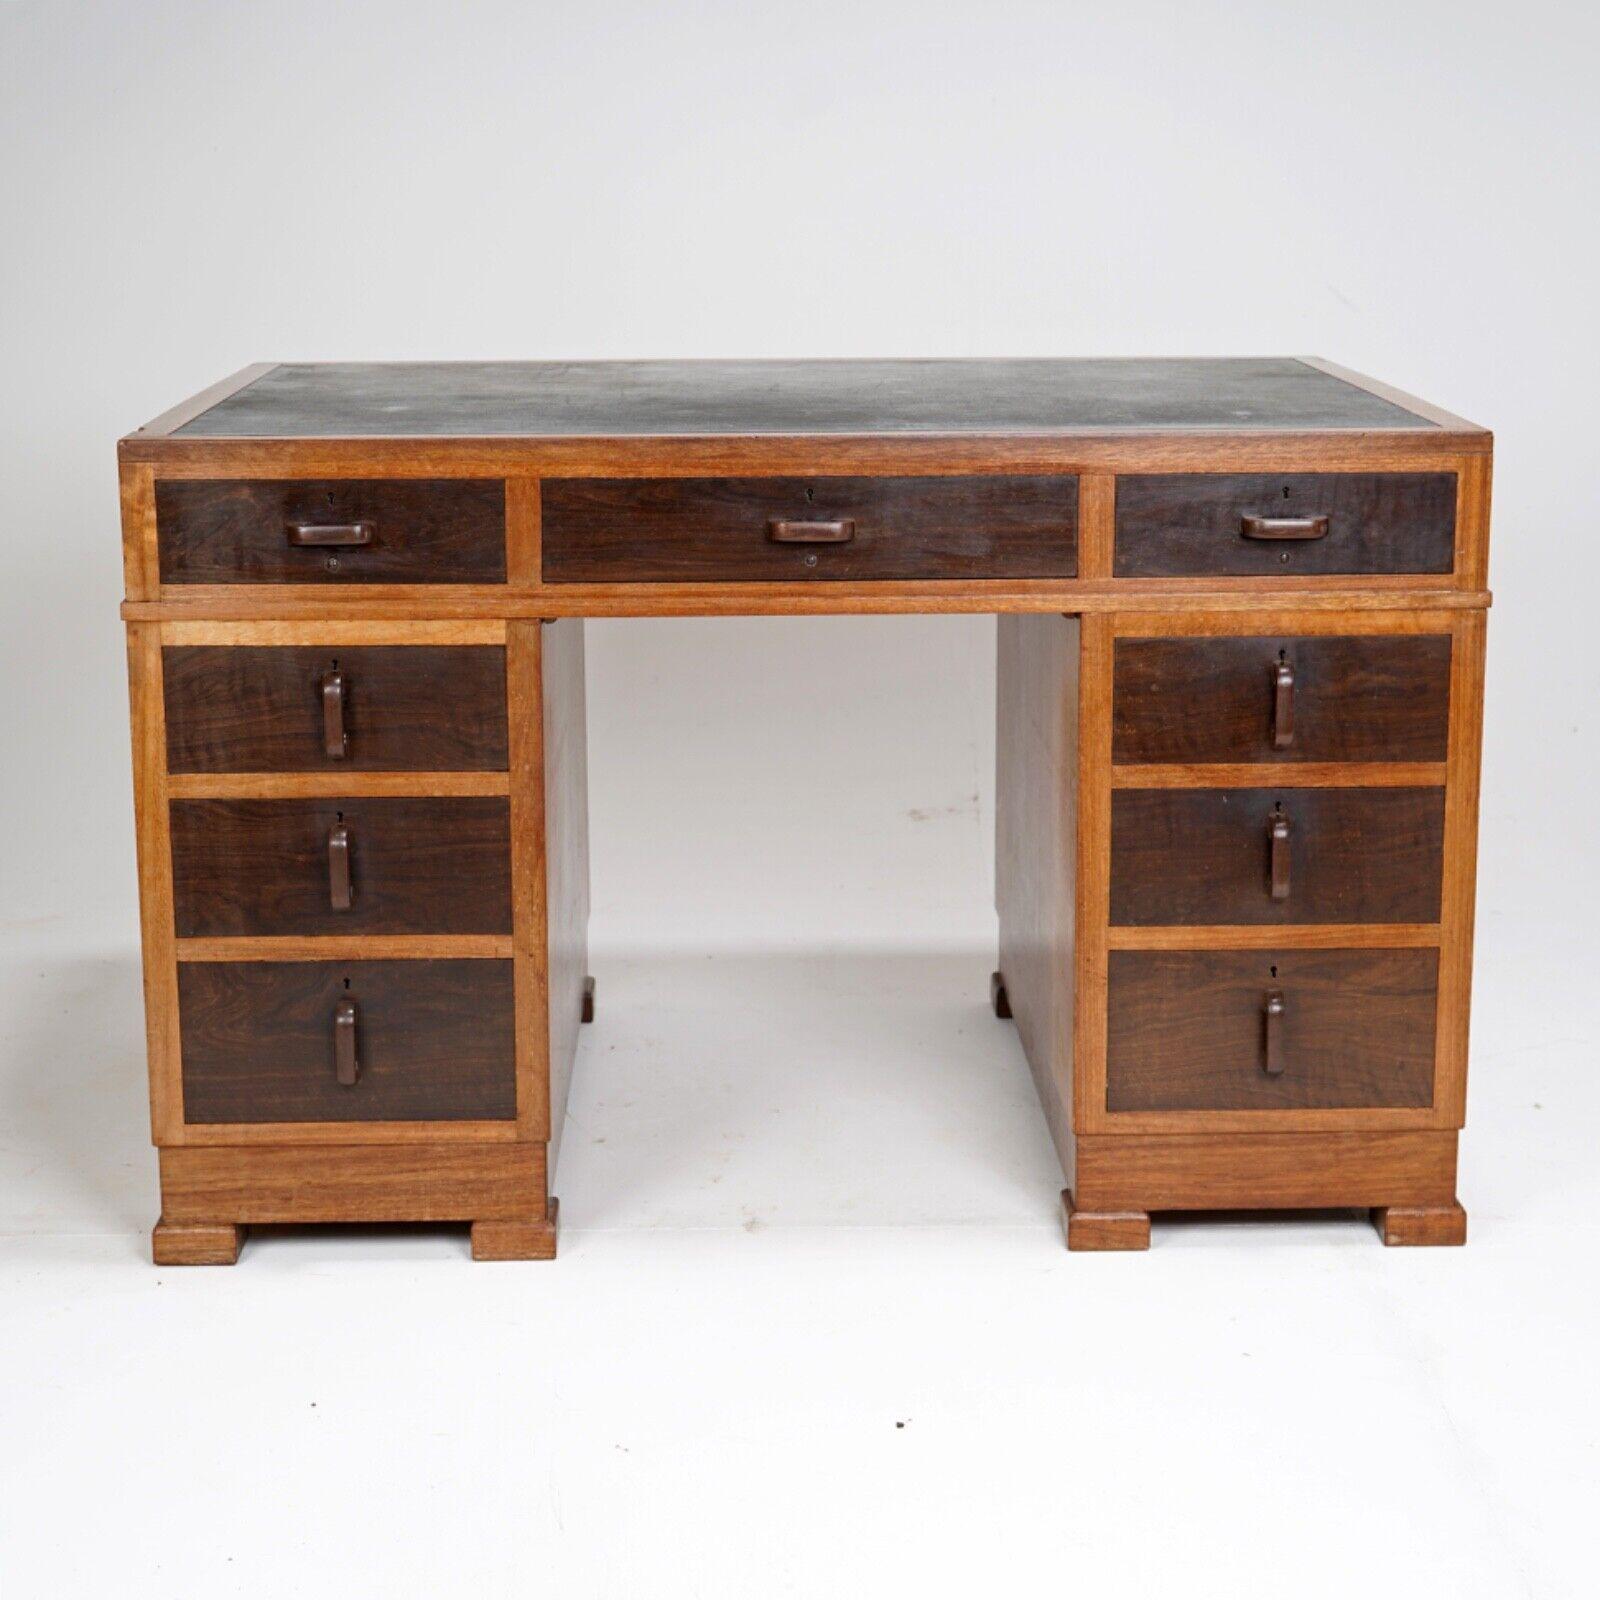 A superb quality English early to mid 20th century pedestal desk. 
The build quality of this desk is second to none. 
Fine hand cut dovetailed joints, drawers made from a finely figured hardwood matching handles that are made from the same